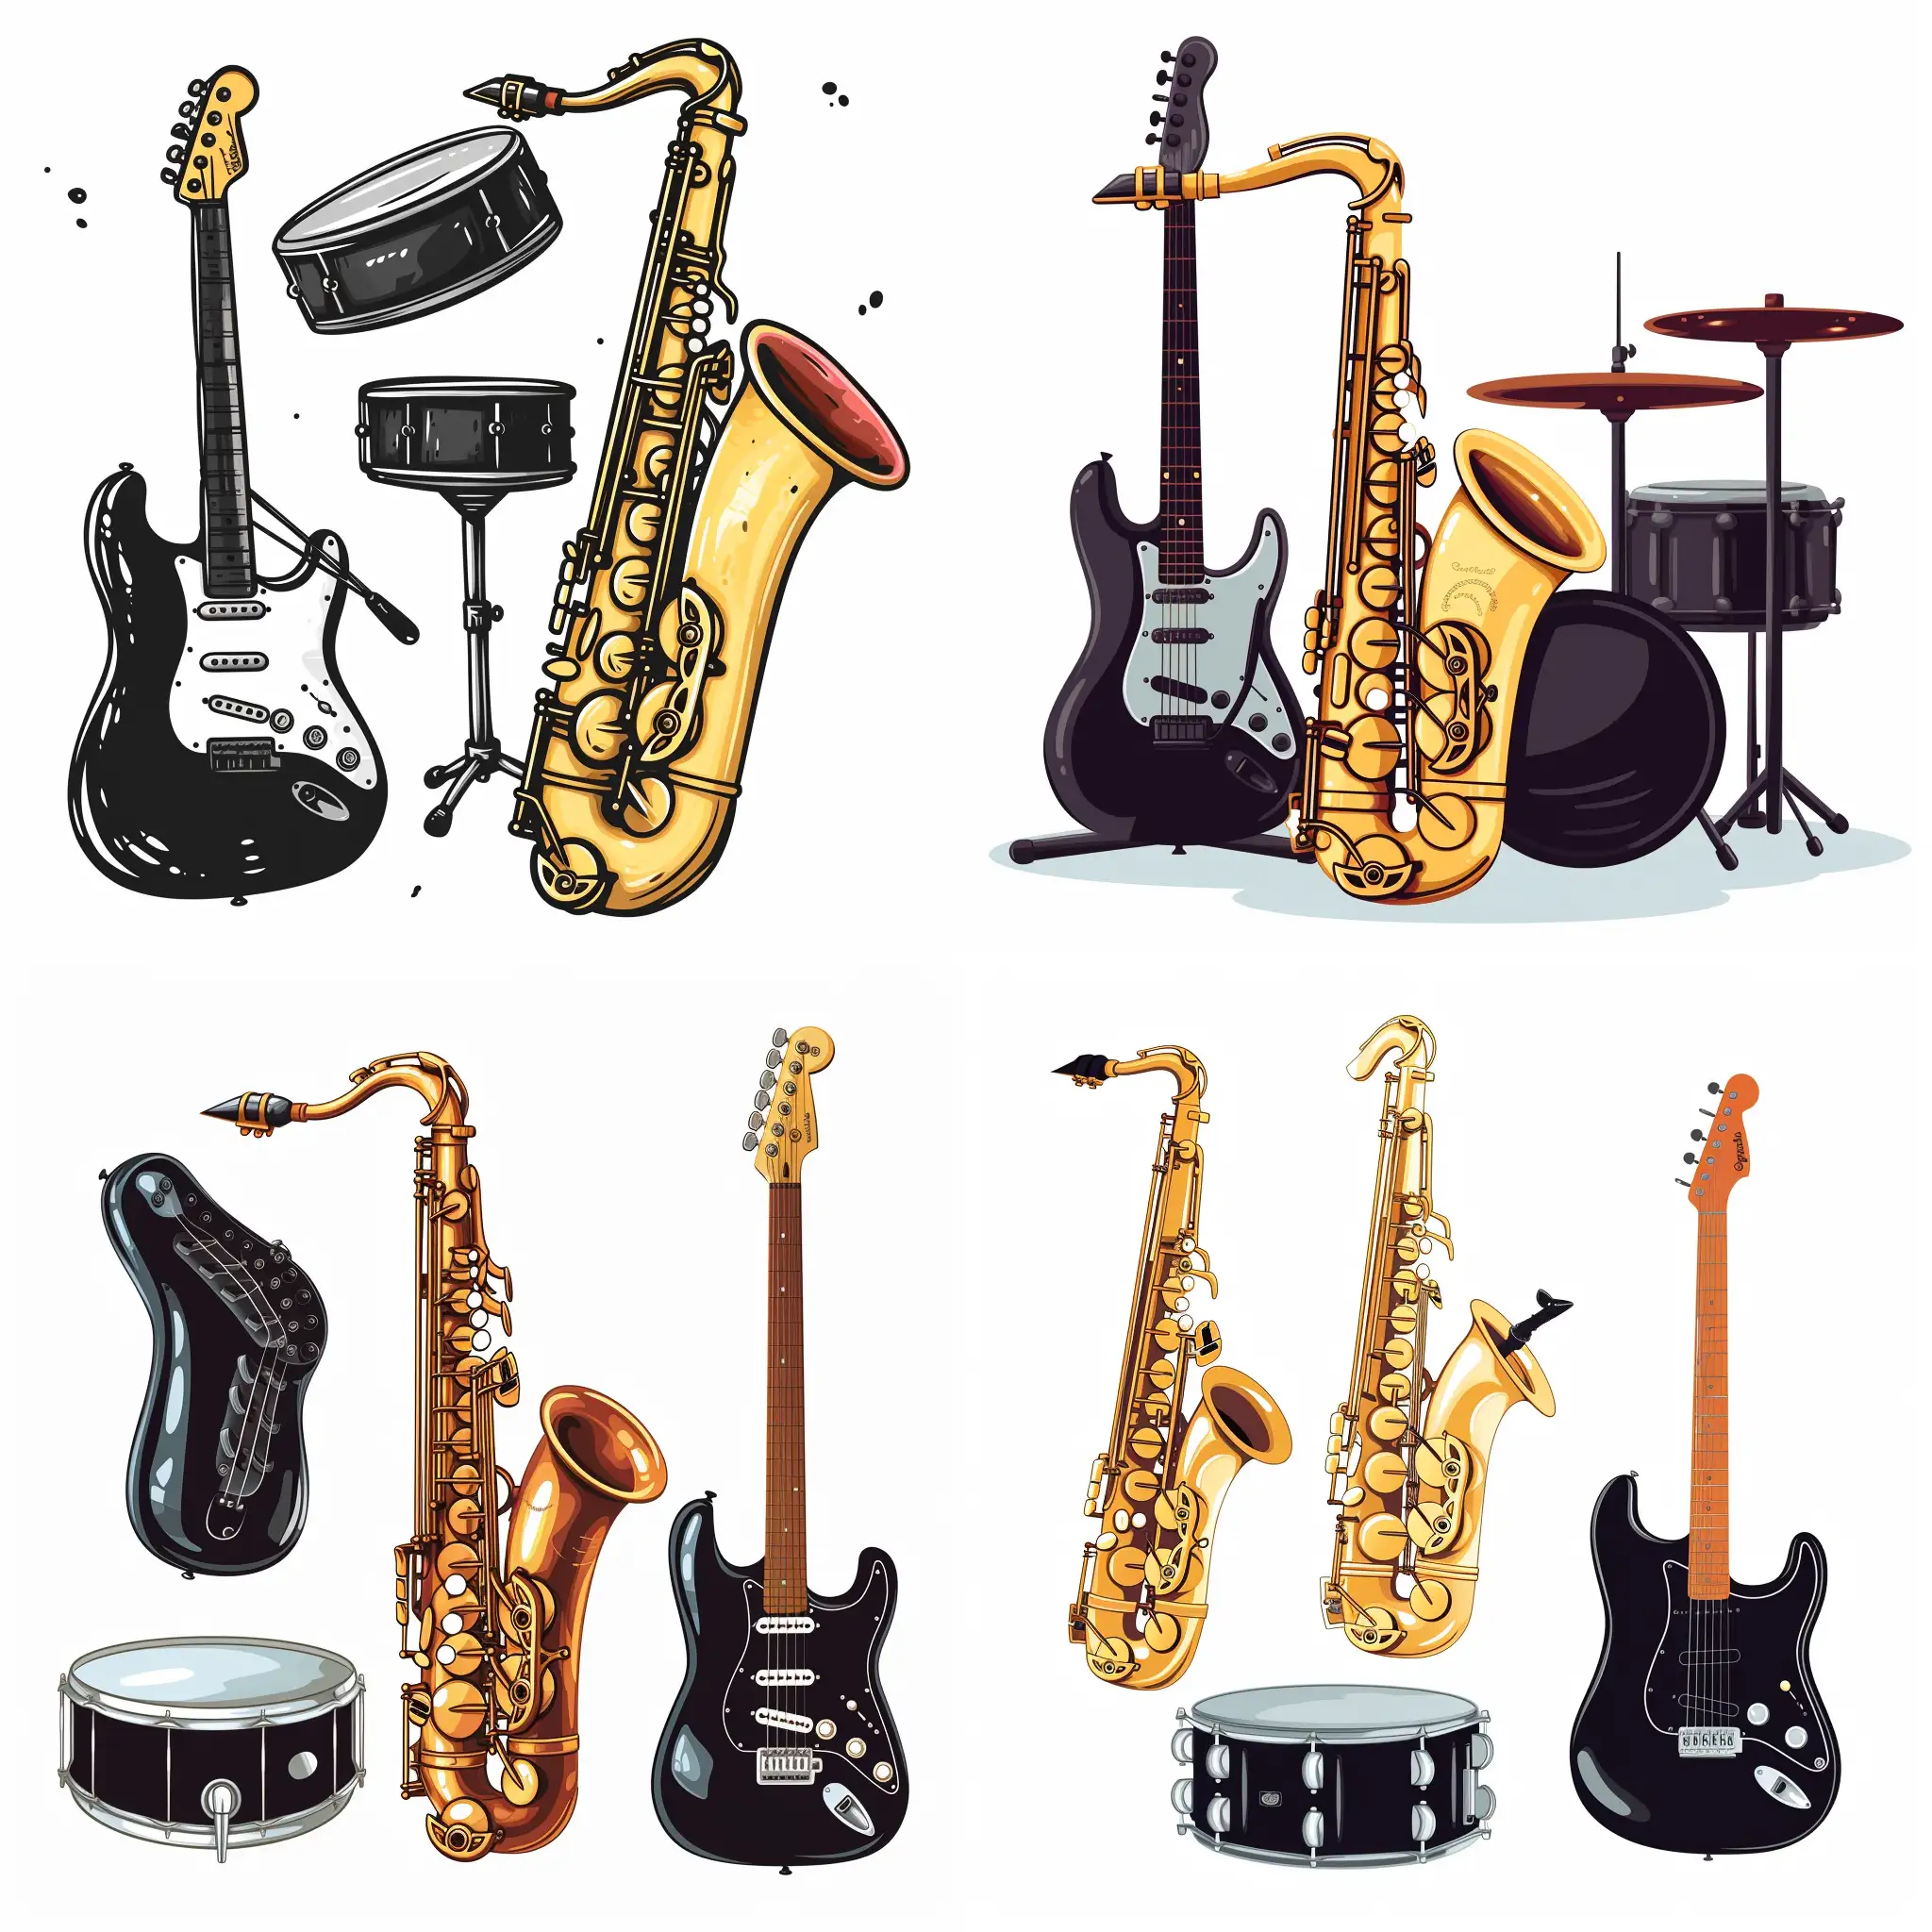 Musical-Instruments-Cartoon-Trio-in-Bold-Black-and-White-Vector-Illustration